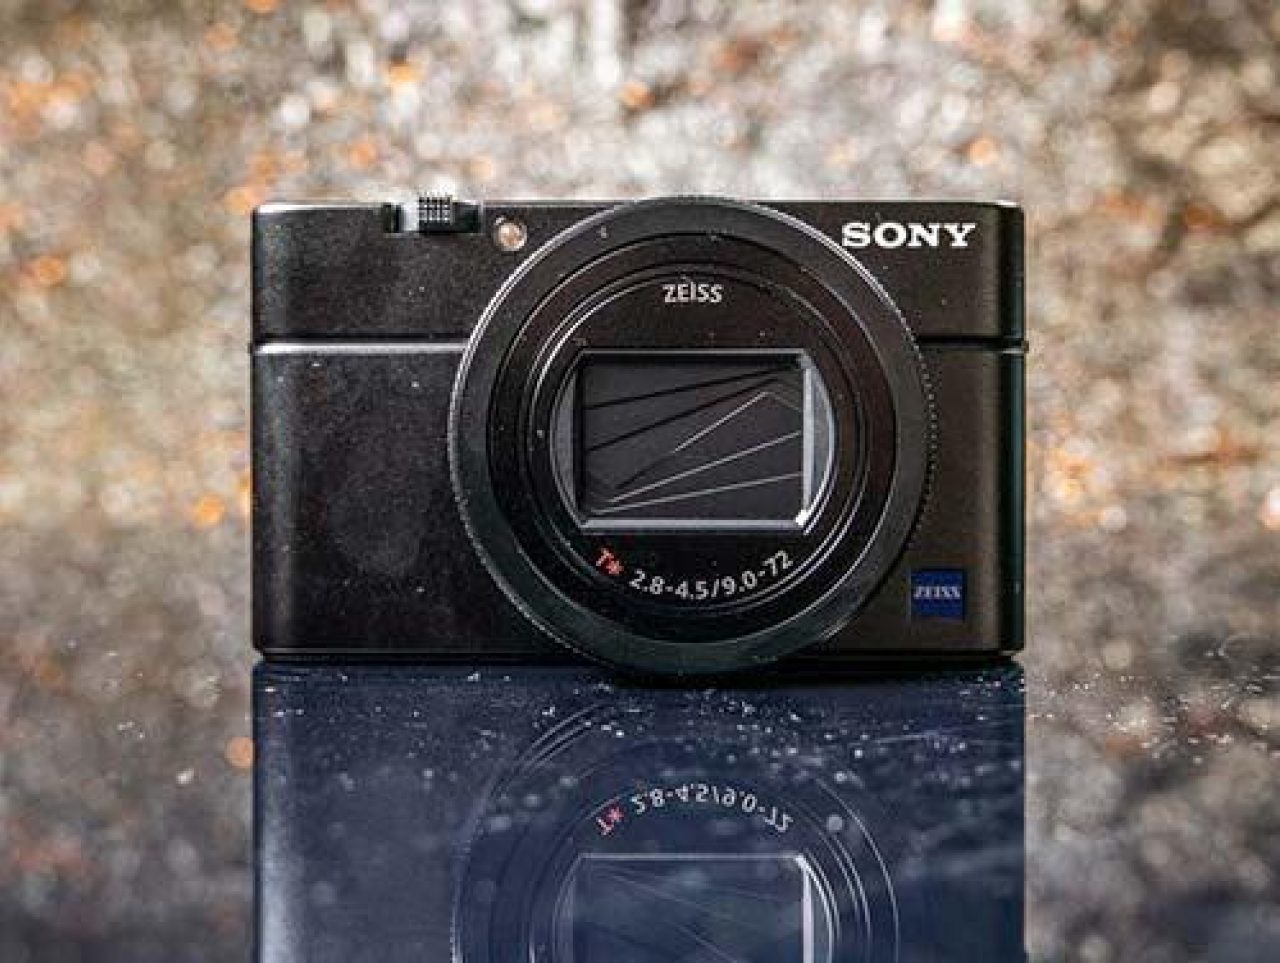 Sony RX100 VII Review - Underwater Photography Guide